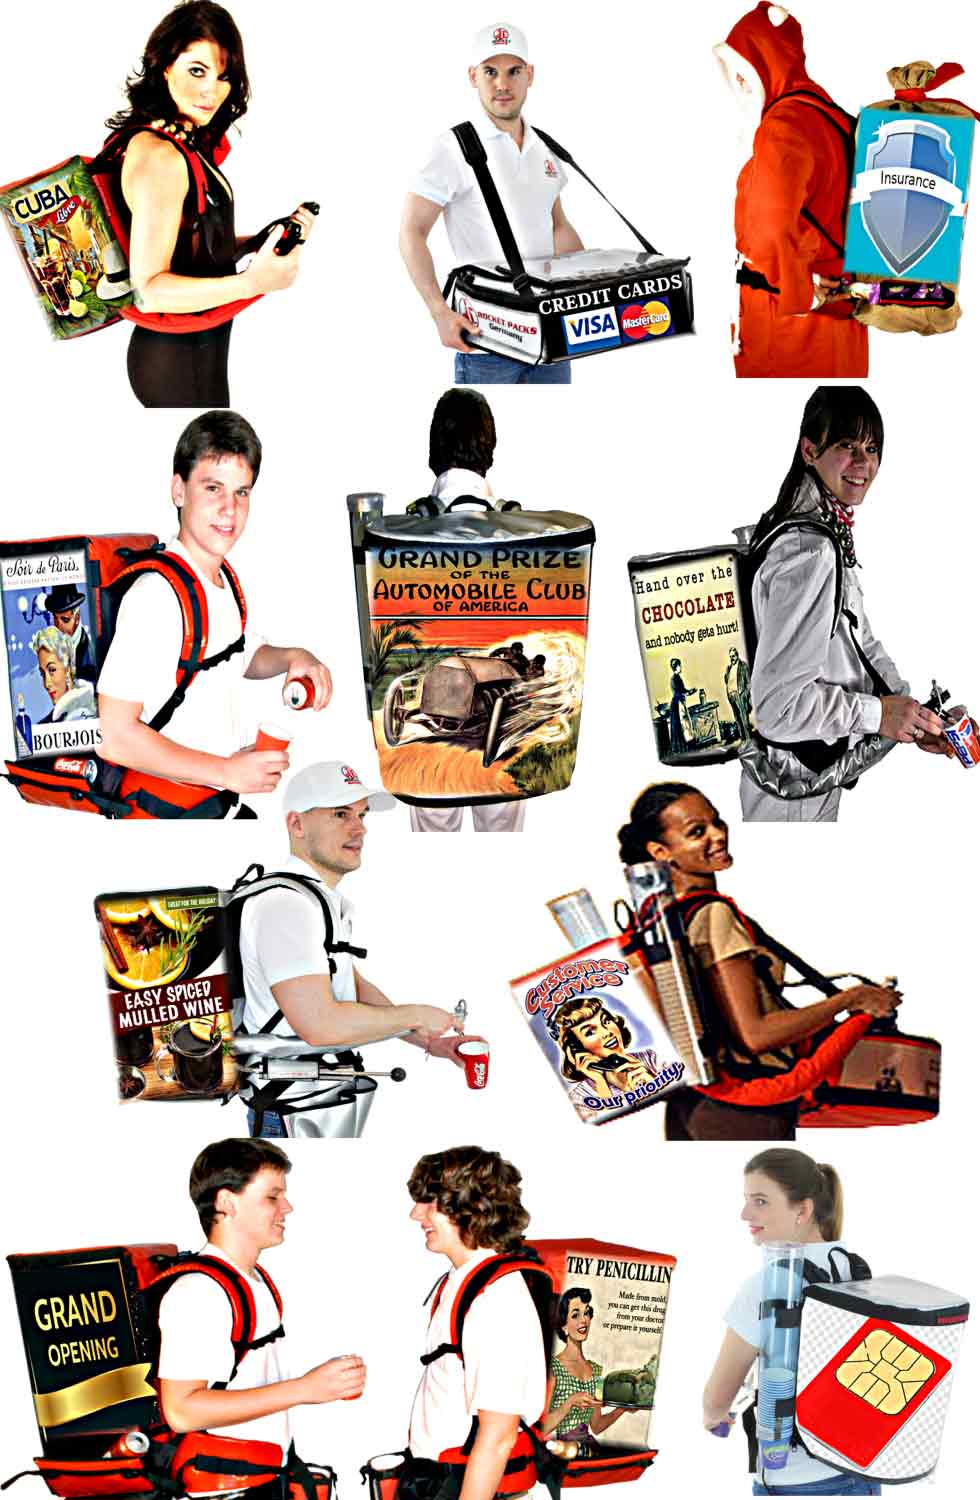 At Rocketpacks you can have backpacks printed with your logo. In the online store you can buy cheap promotional backpacks online. Custom printed backpacks are a great way to draw attention to your business. You can also reach a wide audience with these useful promotional products. If you have any questions about the various printing options, we will be happy to advise you. We look forward to your inquiry!